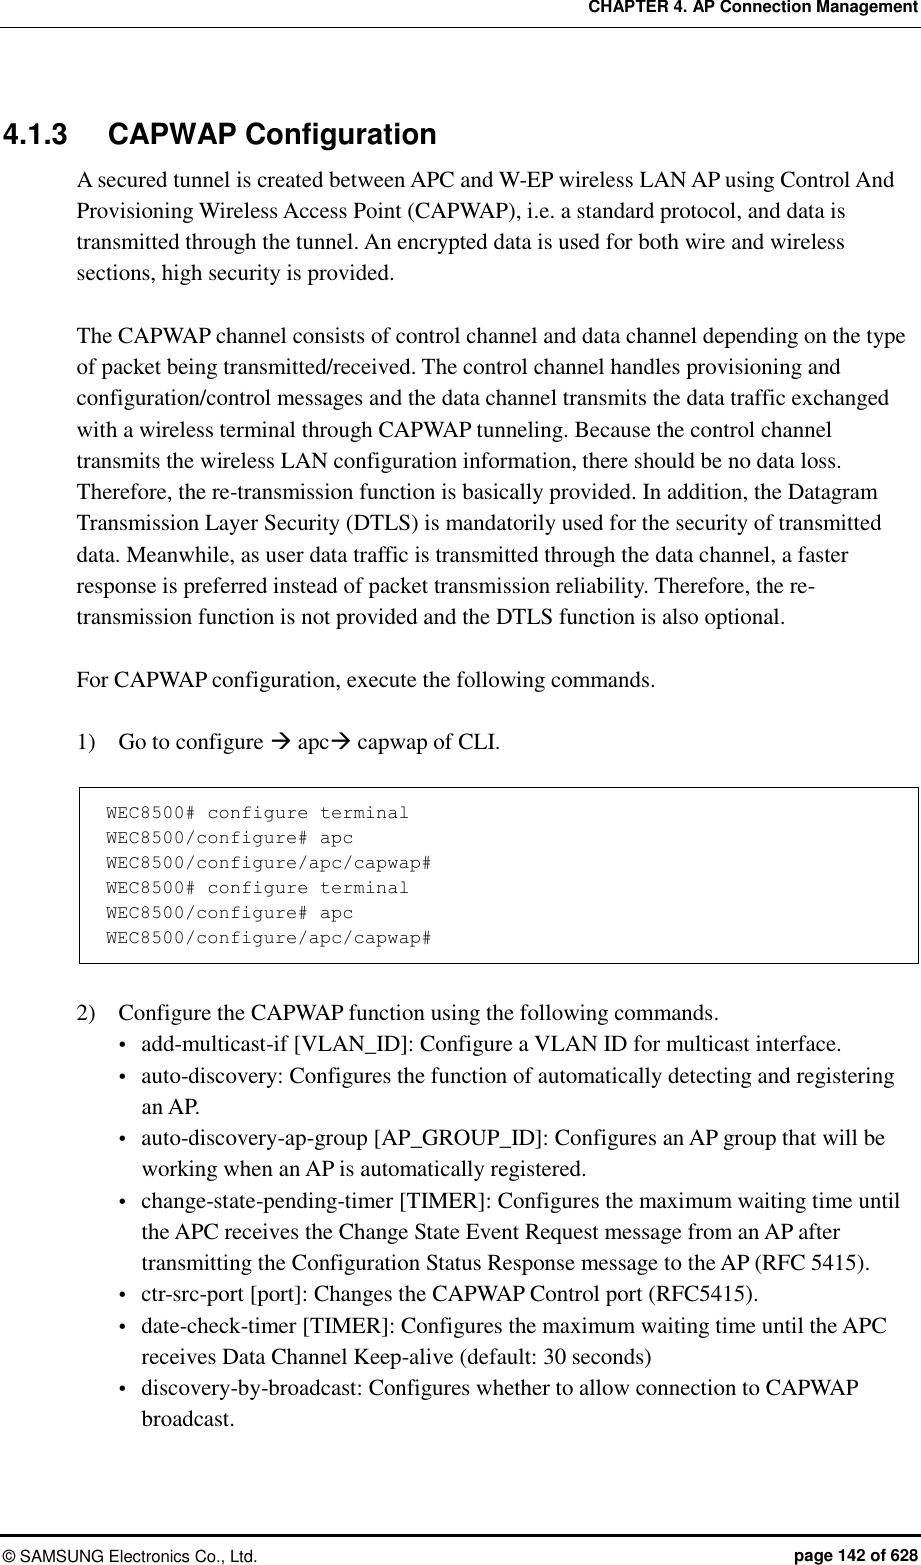 CHAPTER 4. AP Connection Management ©  SAMSUNG Electronics Co., Ltd.  page 142 of 628 4.1.3  CAPWAP Configuration A secured tunnel is created between APC and W-EP wireless LAN AP using Control And Provisioning Wireless Access Point (CAPWAP), i.e. a standard protocol, and data is transmitted through the tunnel. An encrypted data is used for both wire and wireless sections, high security is provided.  The CAPWAP channel consists of control channel and data channel depending on the type of packet being transmitted/received. The control channel handles provisioning and configuration/control messages and the data channel transmits the data traffic exchanged with a wireless terminal through CAPWAP tunneling. Because the control channel transmits the wireless LAN configuration information, there should be no data loss. Therefore, the re-transmission function is basically provided. In addition, the Datagram Transmission Layer Security (DTLS) is mandatorily used for the security of transmitted data. Meanwhile, as user data traffic is transmitted through the data channel, a faster response is preferred instead of packet transmission reliability. Therefore, the re-transmission function is not provided and the DTLS function is also optional.    For CAPWAP configuration, execute the following commands.  1)    Go to configure  apc capwap of CLI.  WEC8500# configure terminal WEC8500/configure# apc WEC8500/configure/apc/capwap# WEC8500# configure terminal WEC8500/configure# apc WEC8500/configure/apc/capwap#  2)    Configure the CAPWAP function using the following commands.  add-multicast-if [VLAN_ID]: Configure a VLAN ID for multicast interface.  auto-discovery: Configures the function of automatically detecting and registering an AP.  auto-discovery-ap-group [AP_GROUP_ID]: Configures an AP group that will be working when an AP is automatically registered.  change-state-pending-timer [TIMER]: Configures the maximum waiting time until the APC receives the Change State Event Request message from an AP after transmitting the Configuration Status Response message to the AP (RFC 5415).  ctr-src-port [port]: Changes the CAPWAP Control port (RFC5415).  date-check-timer [TIMER]: Configures the maximum waiting time until the APC receives Data Channel Keep-alive (default: 30 seconds)  discovery-by-broadcast: Configures whether to allow connection to CAPWAP broadcast. 